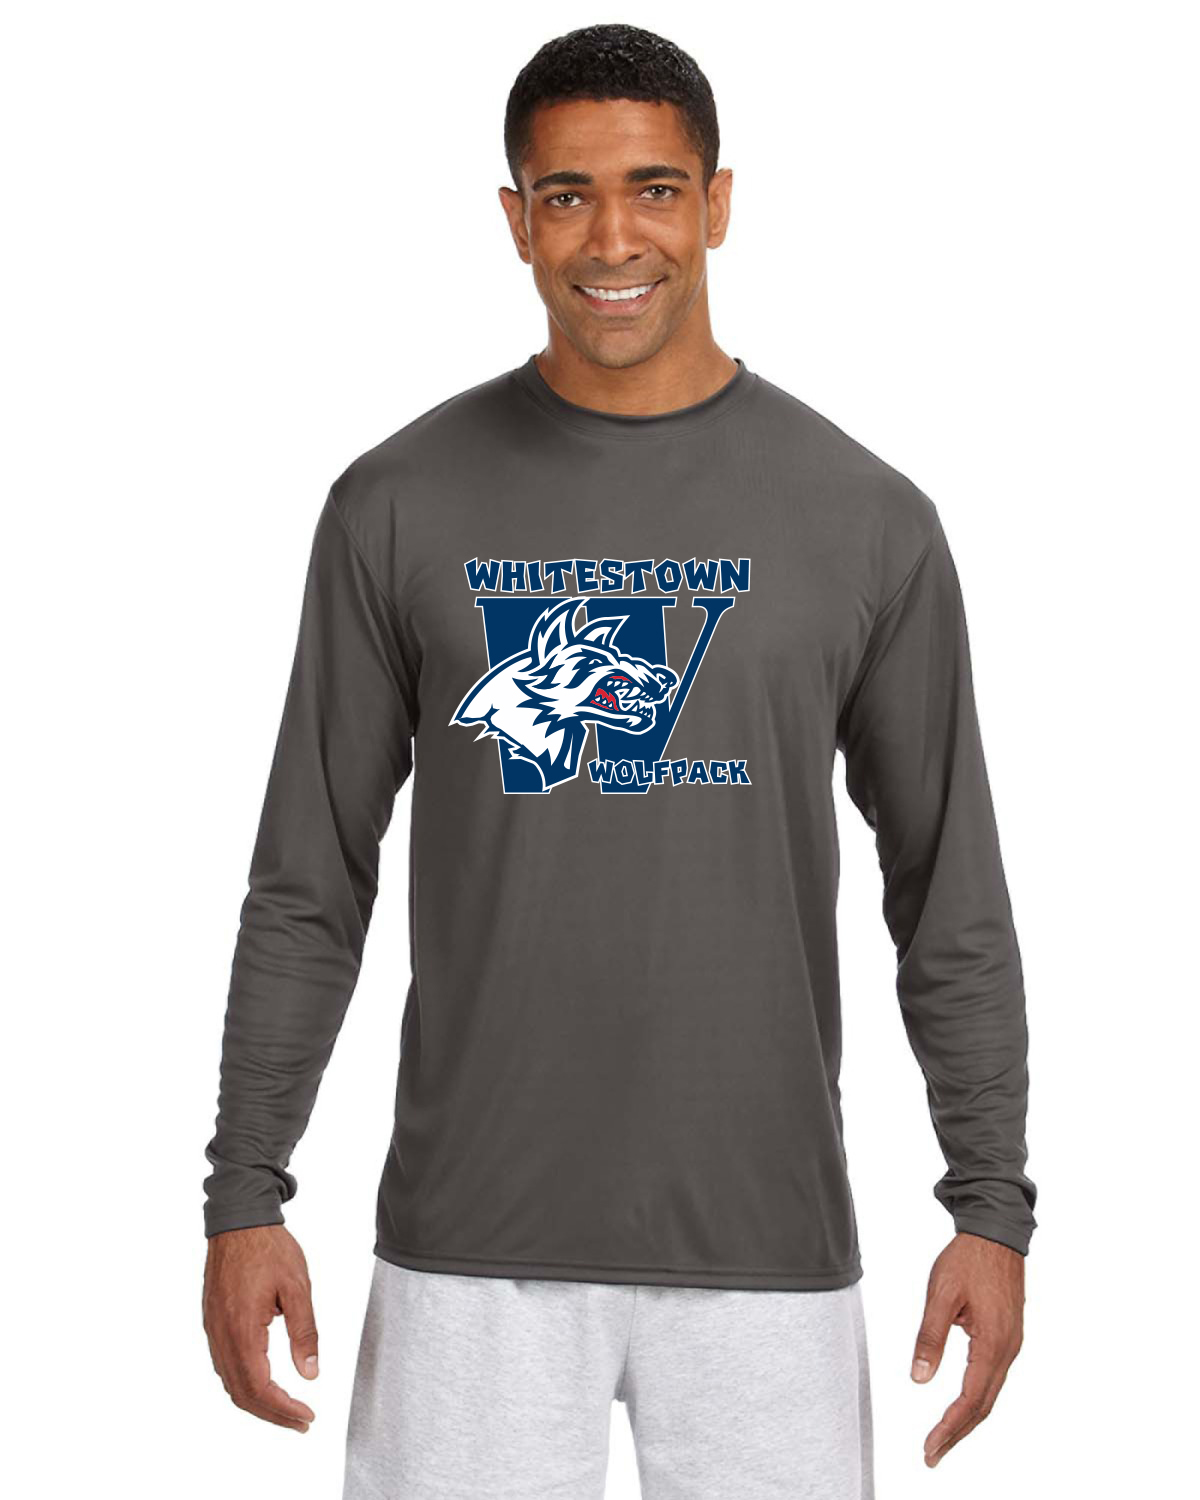 A4 Long Sleeve with Whitestown Wolf Pack with screen printed logo (Back ...